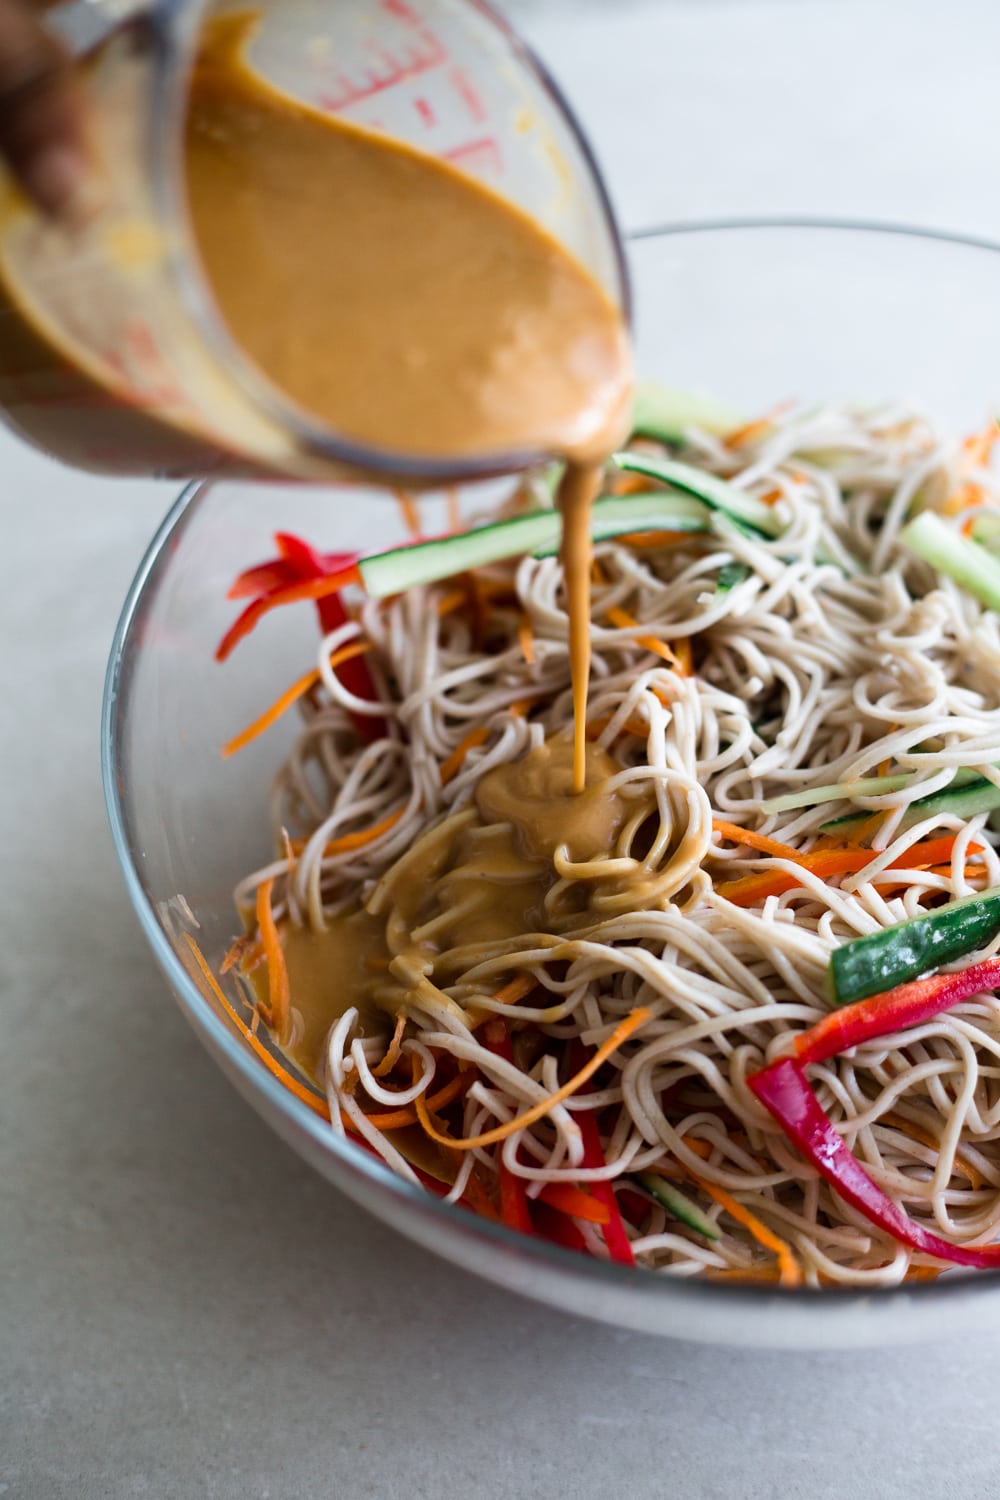 A delicious and healthy Vegan Peanut Soba Noodle Salad Recipe. Soba Noodles and Colorful Veggies dressed in an easy and delicious Peanut Sauce. #vegan #peanut #japanese #soba #noodle #salad #summer #simple #healthy #peanutbutter #lunchbox #packedlunch #cold 